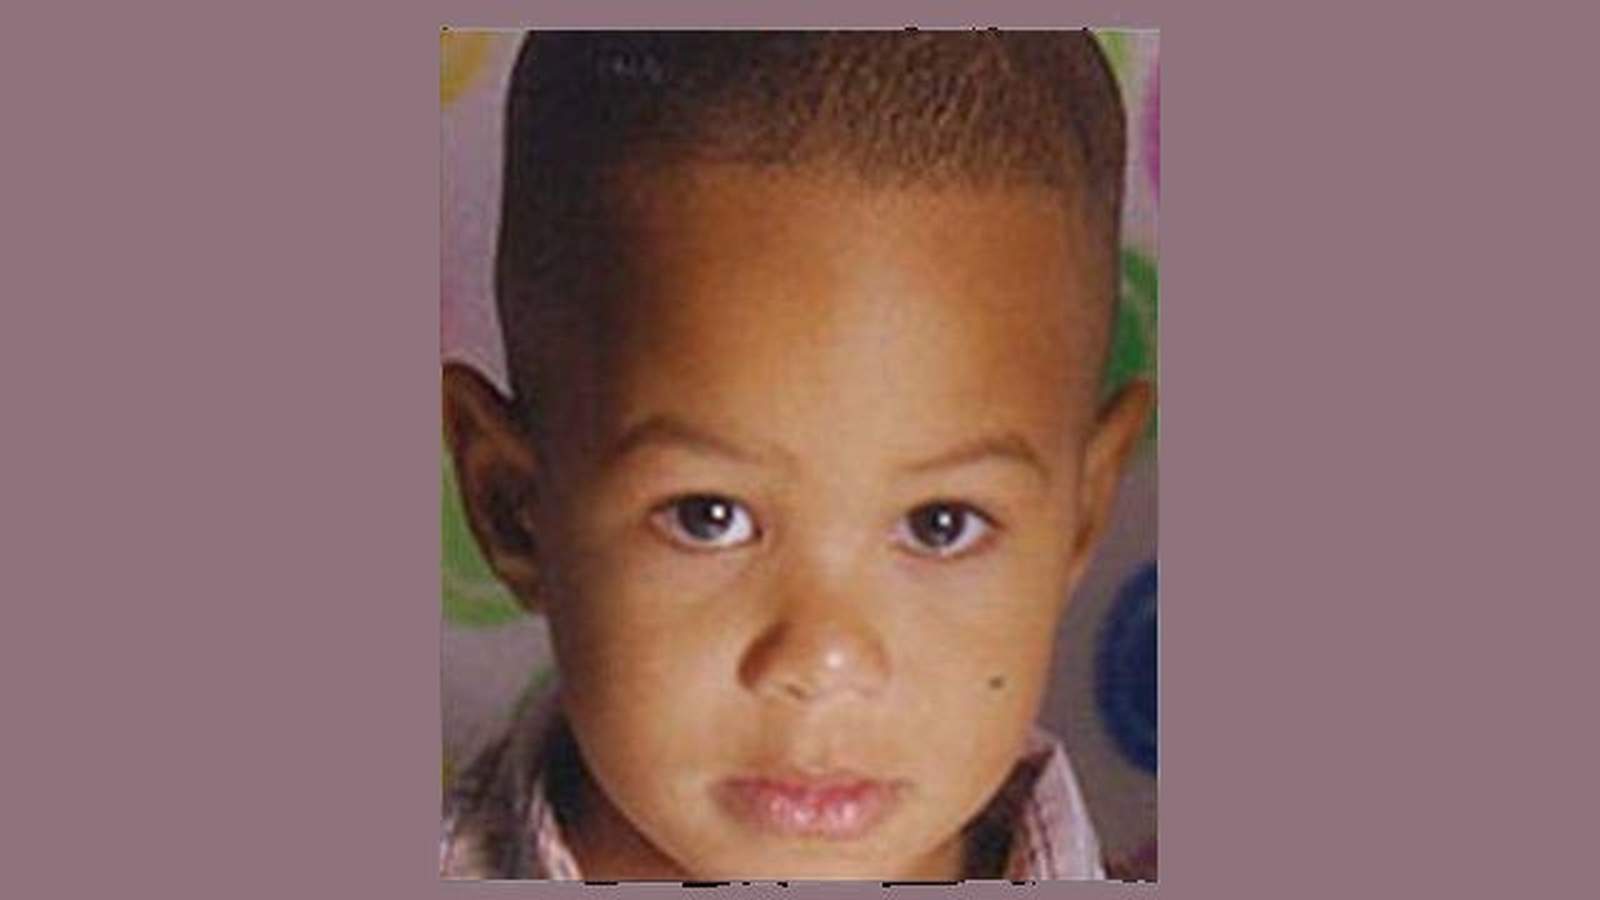 Kendrick Jackson: Do you remember when this 3-year-old vanished?